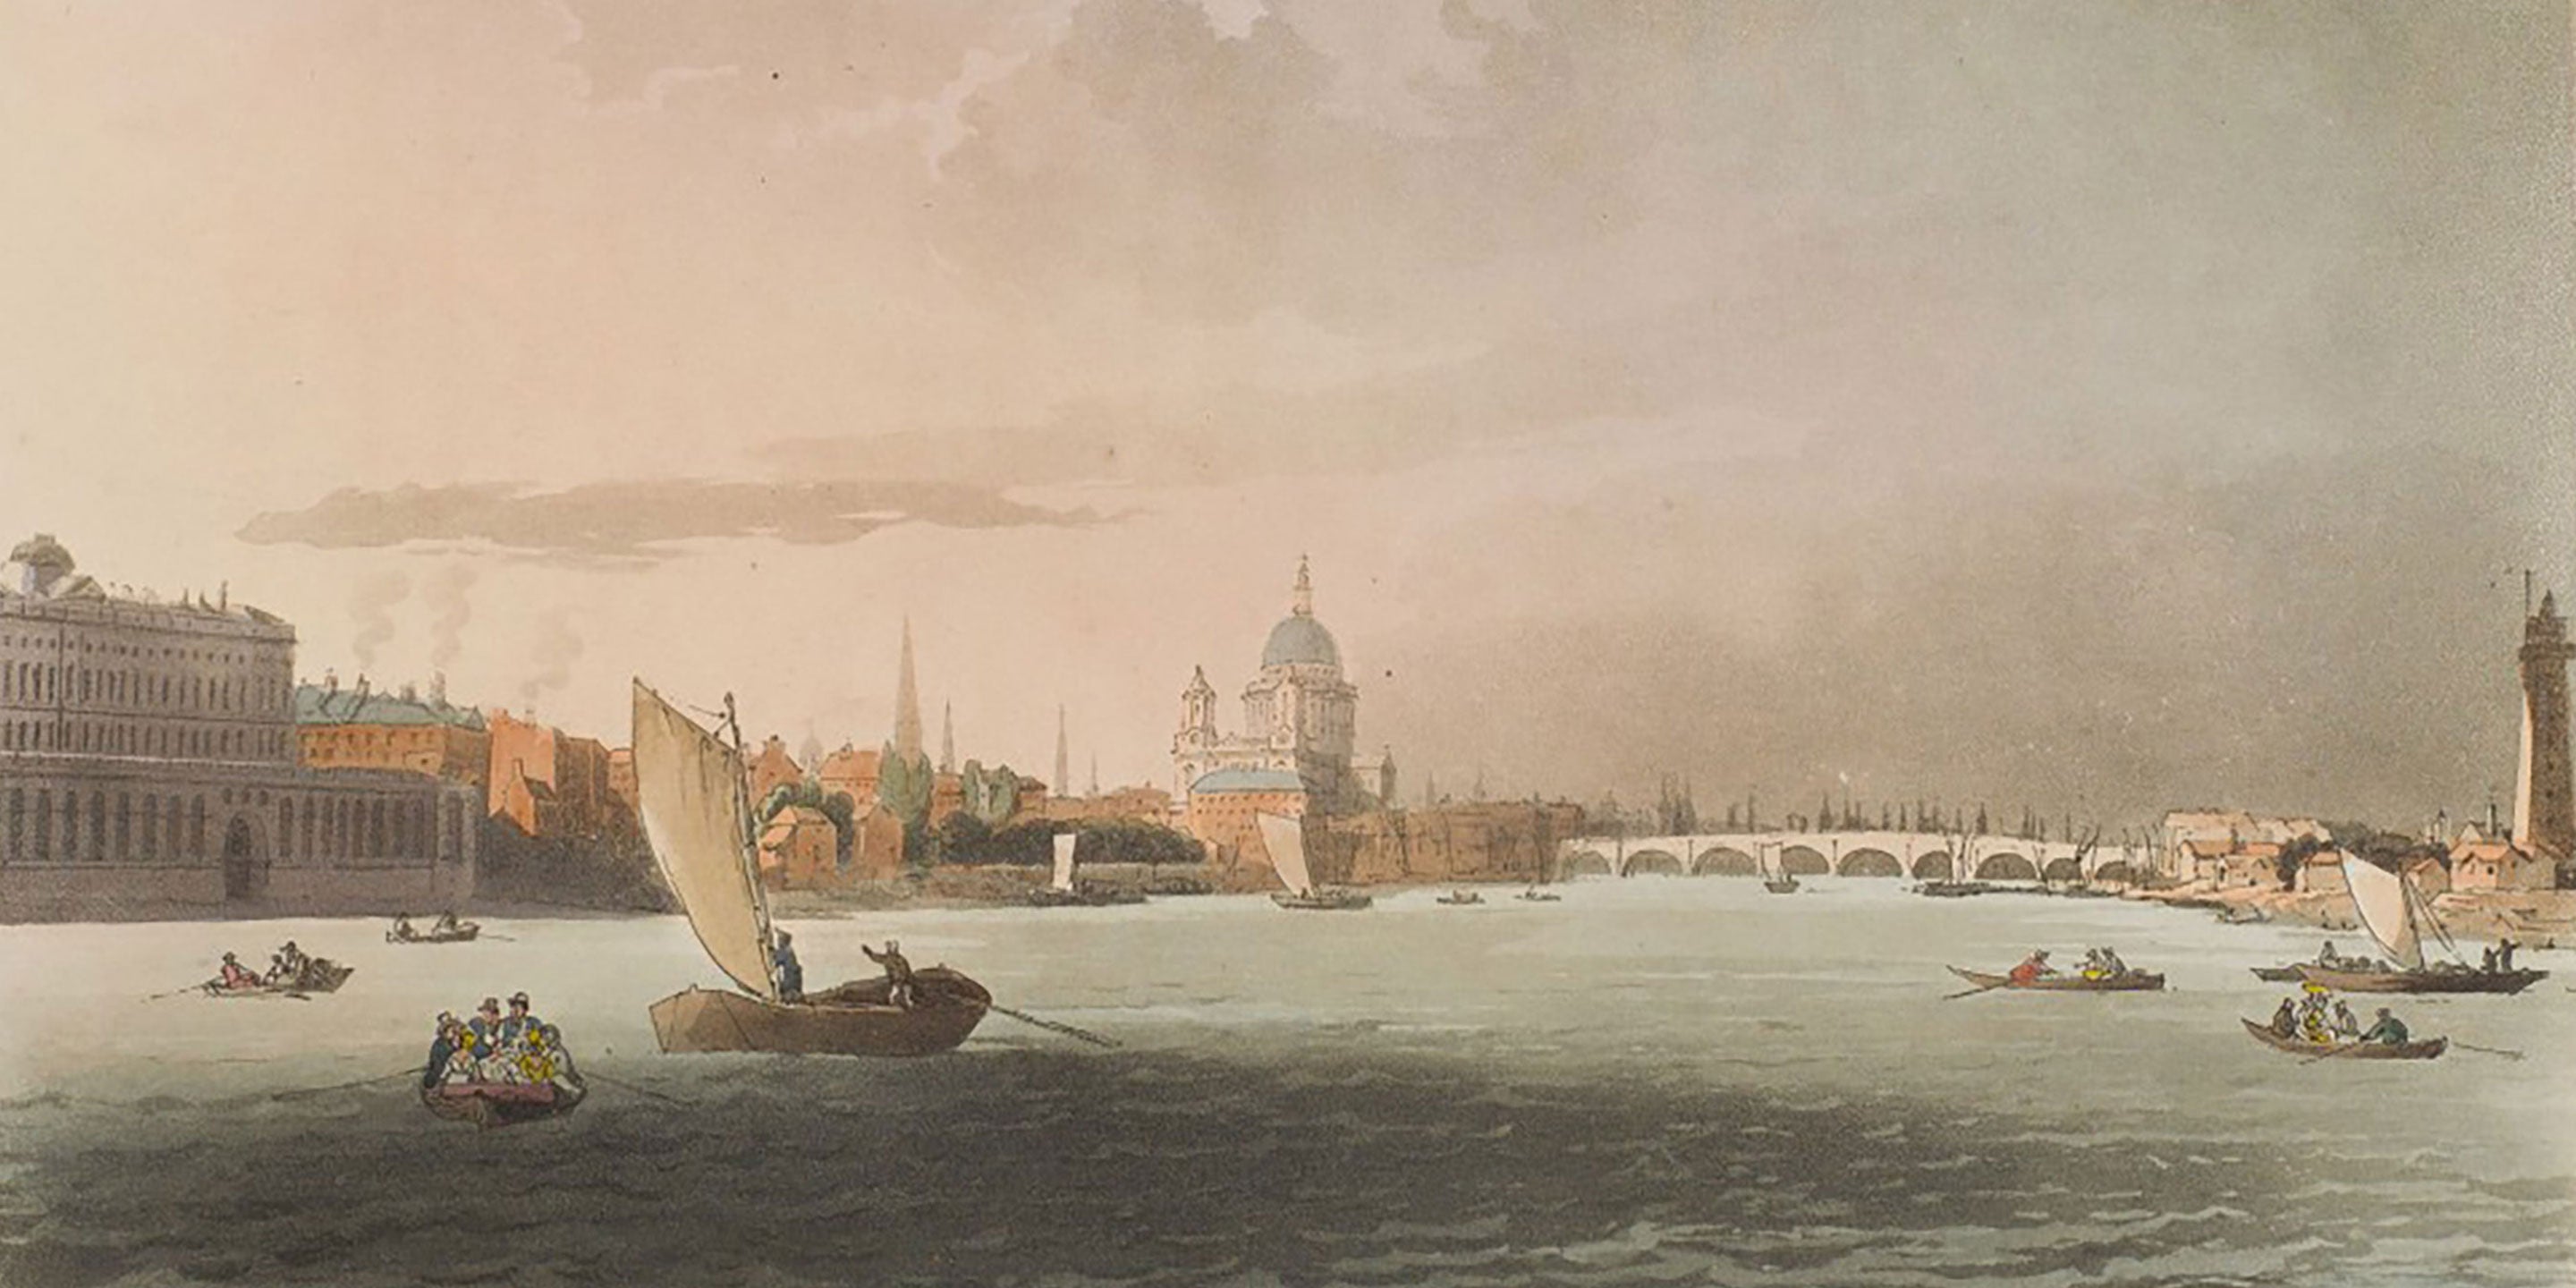 A View of London from the Thames